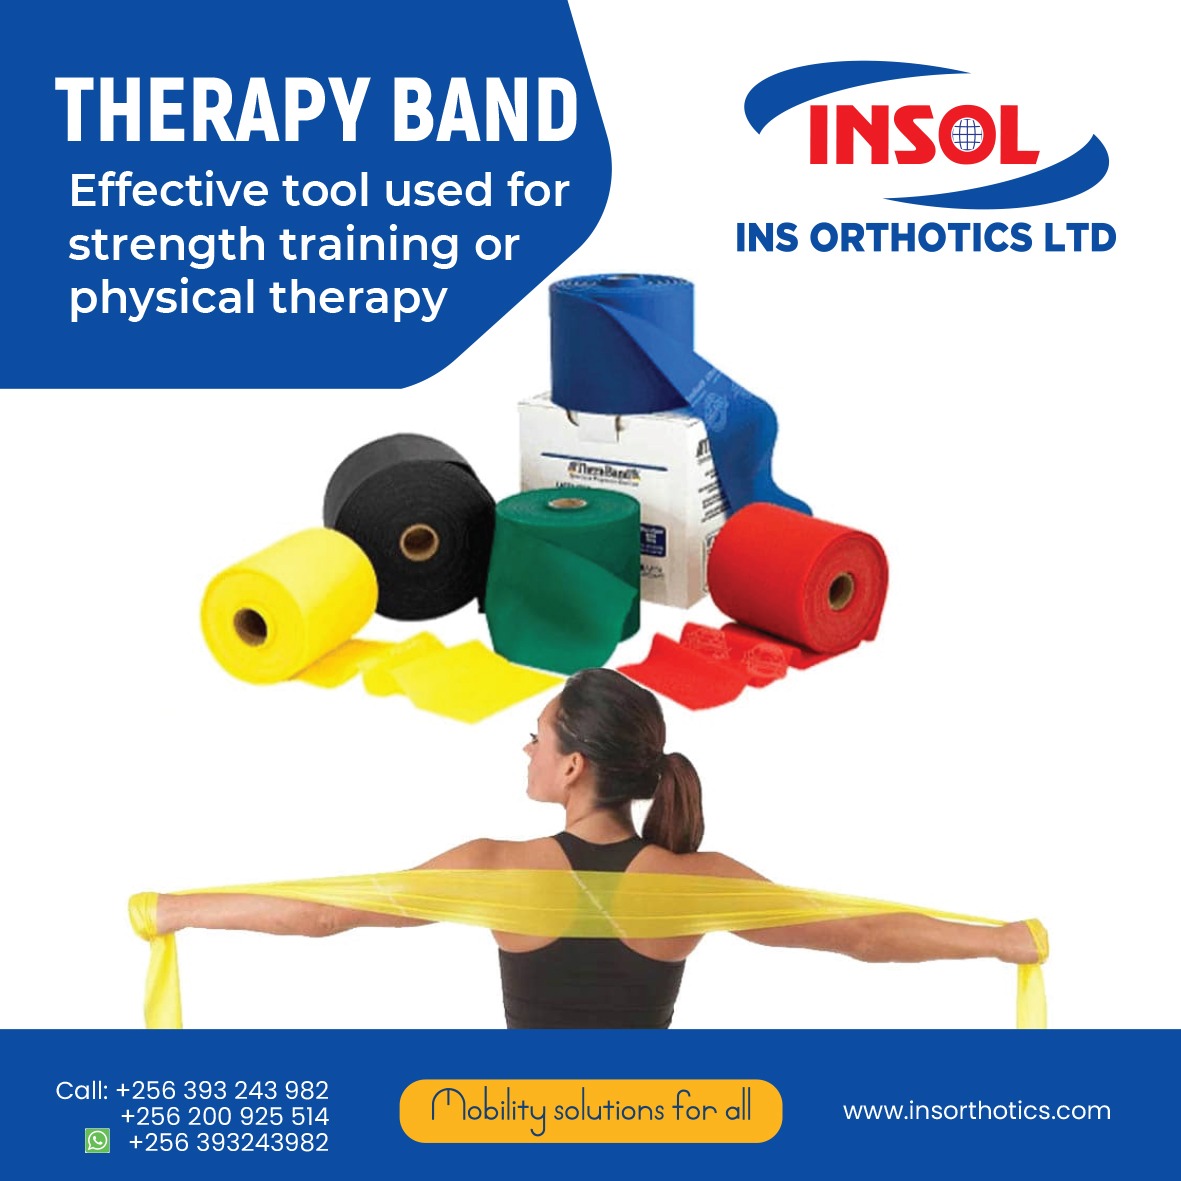 Therapy bands provide resistance during exercises to improve strength, range of motion and overall muscular function. They are suitable for home workouts, clinical settings,recovery from an injury, enhancing athletic performance and  to tone and strengthen your muscles.